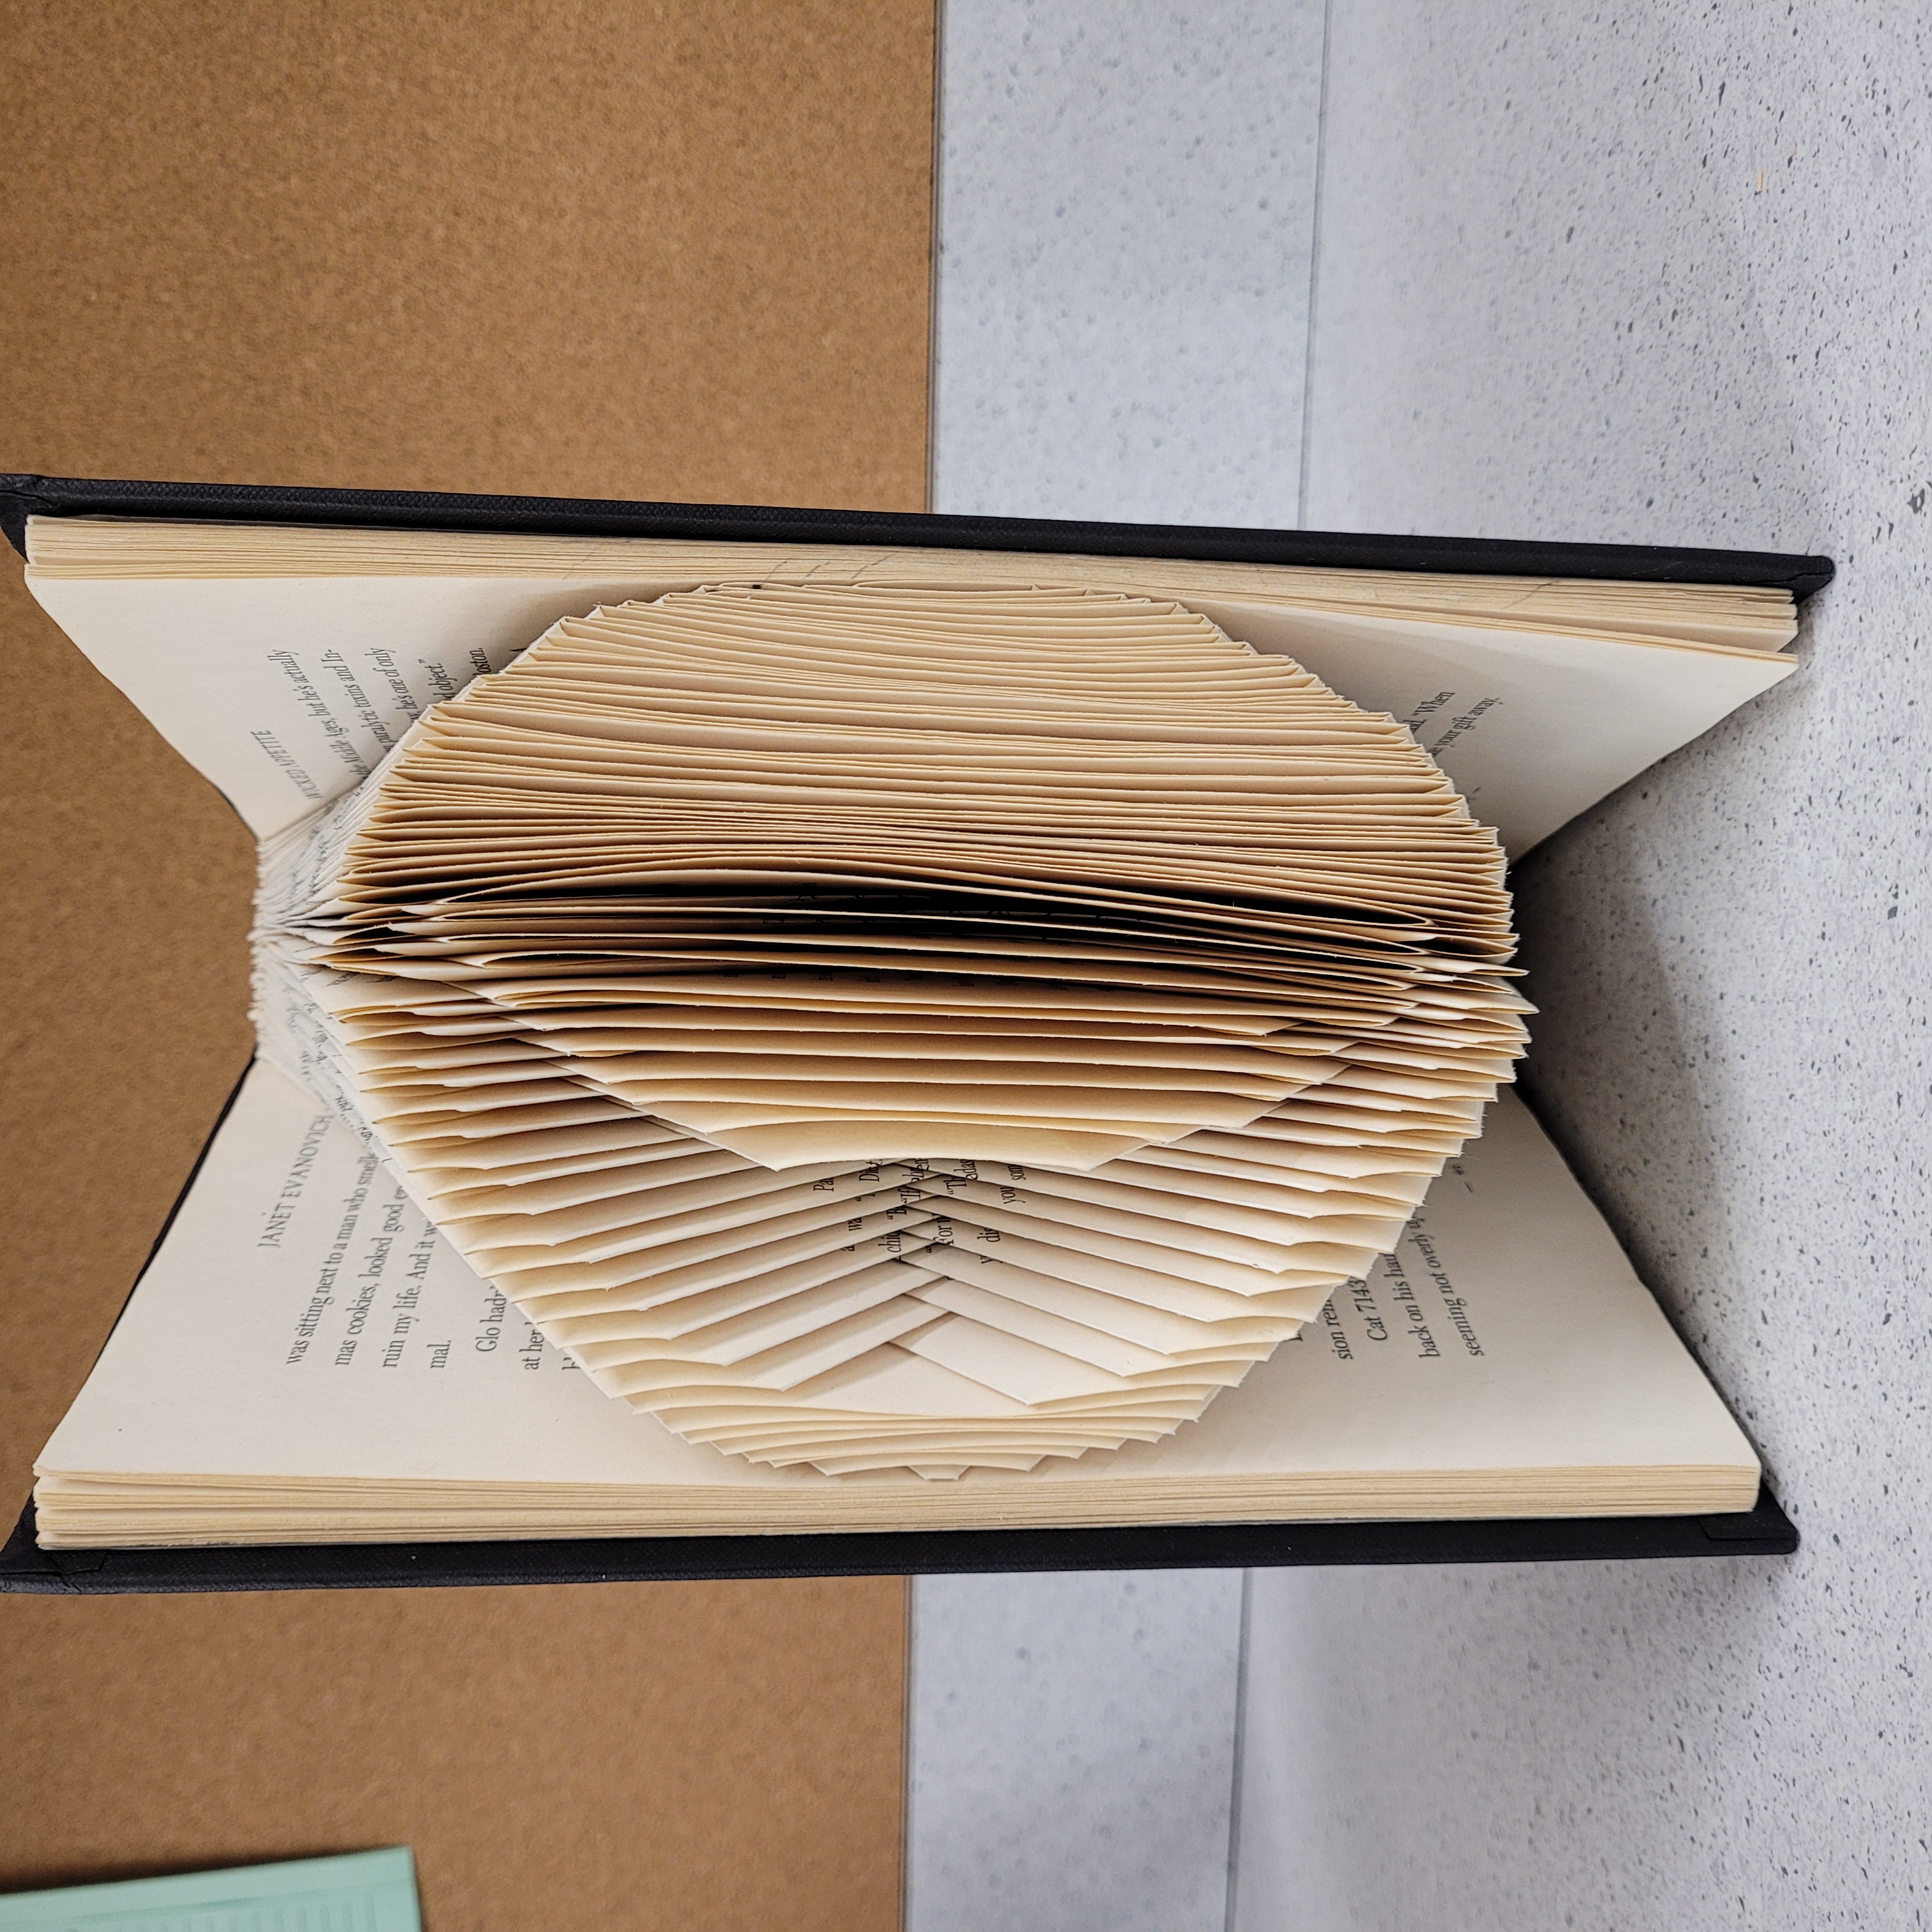 Book folded with a sun and moon design